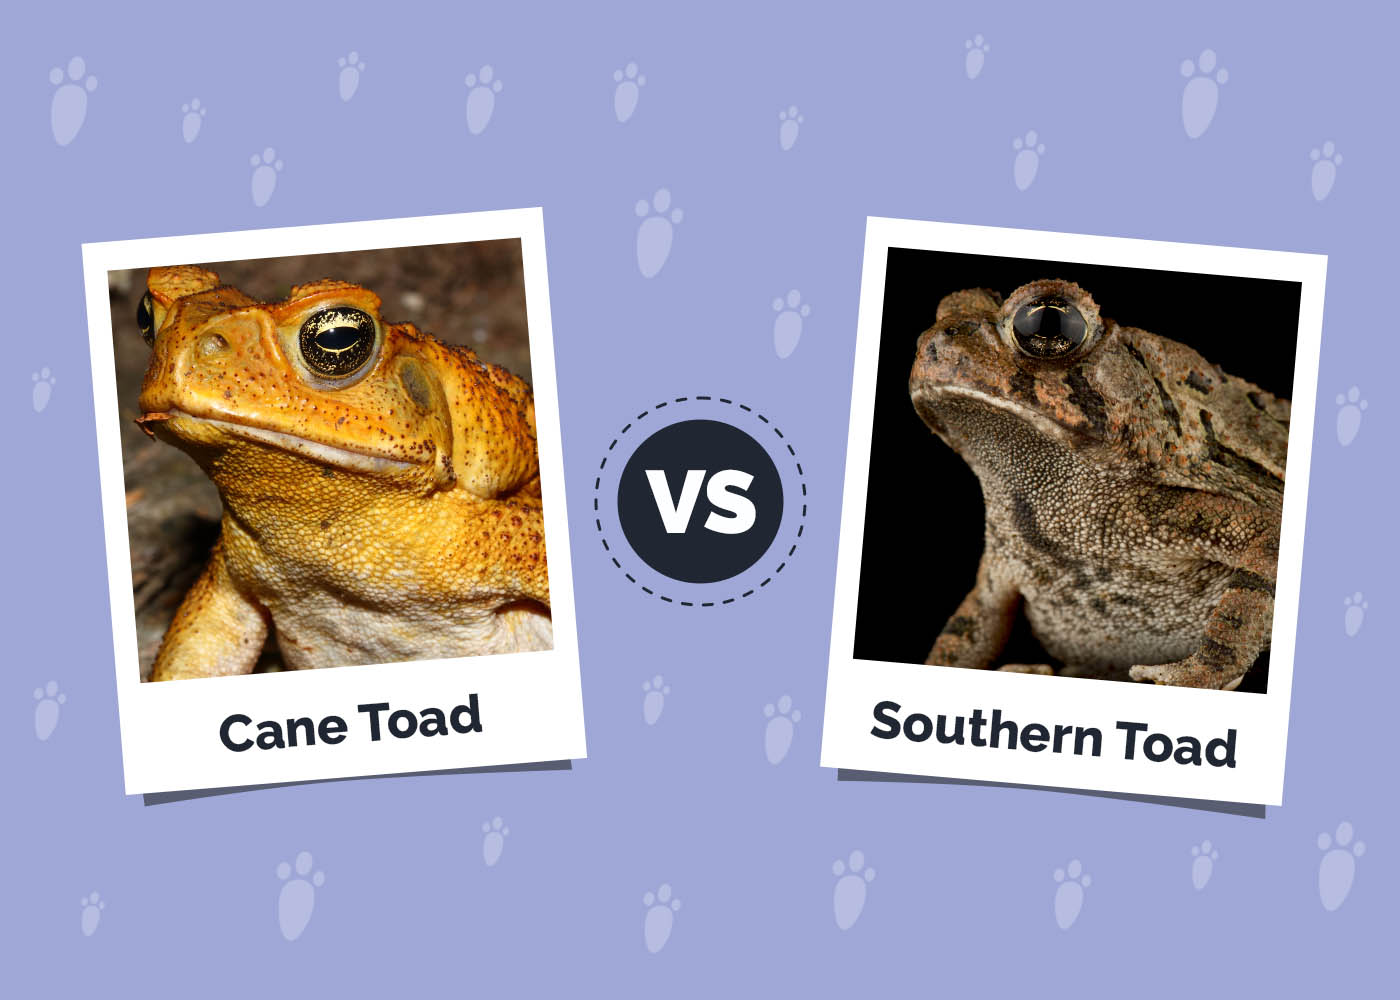 Cane Toad vs Southern Toad